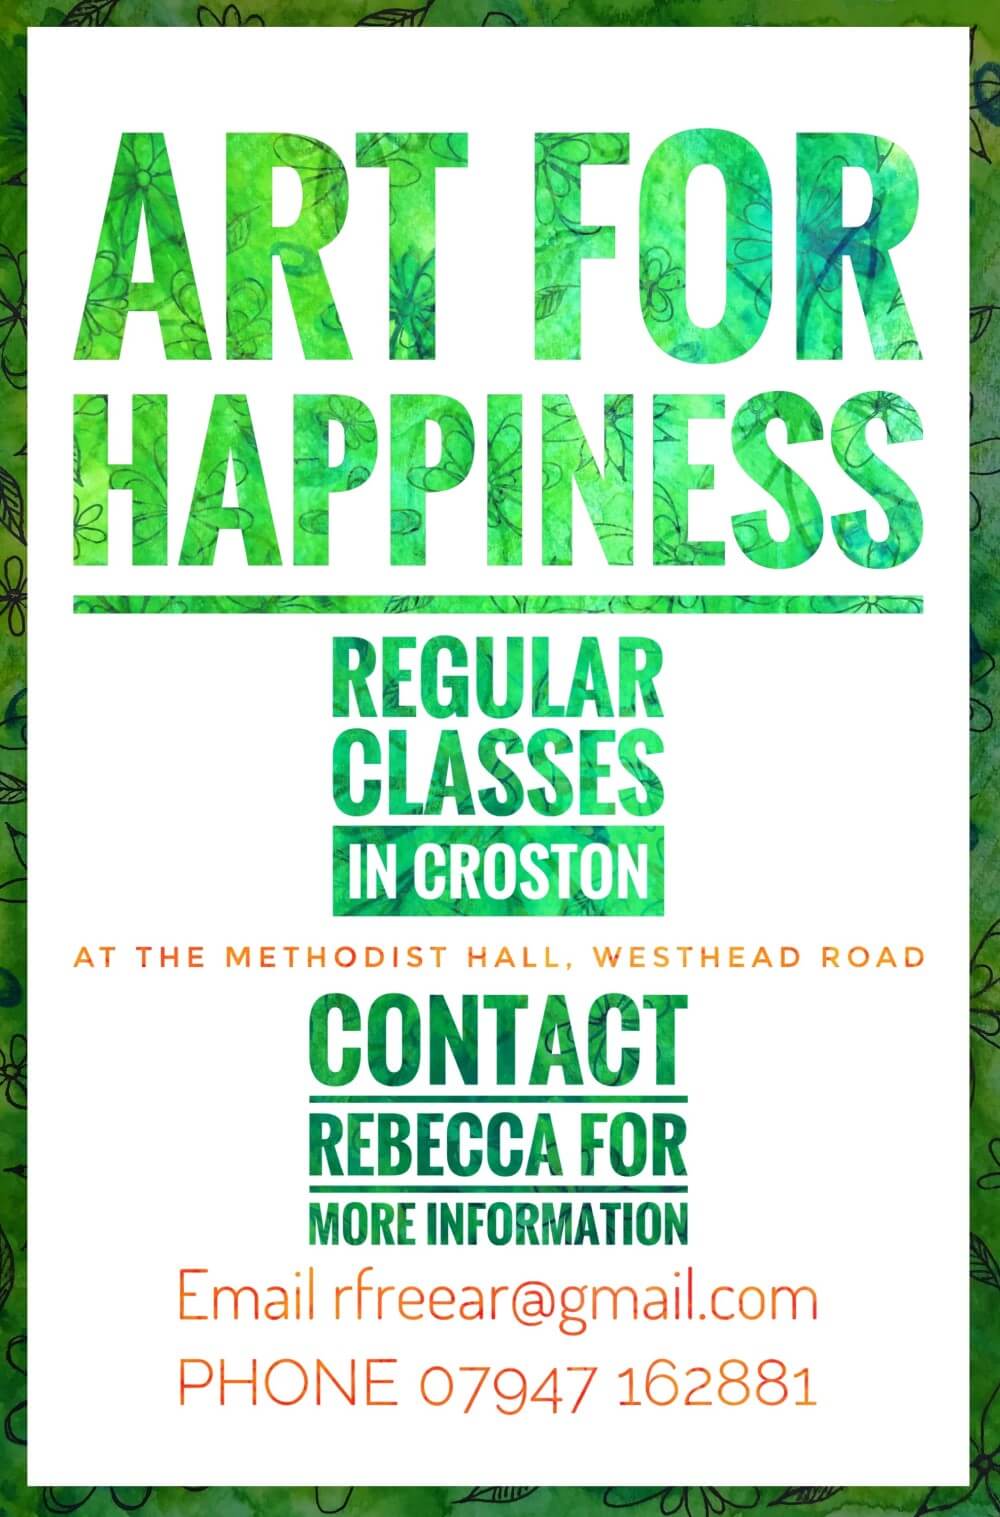 Poster for classes at Croston